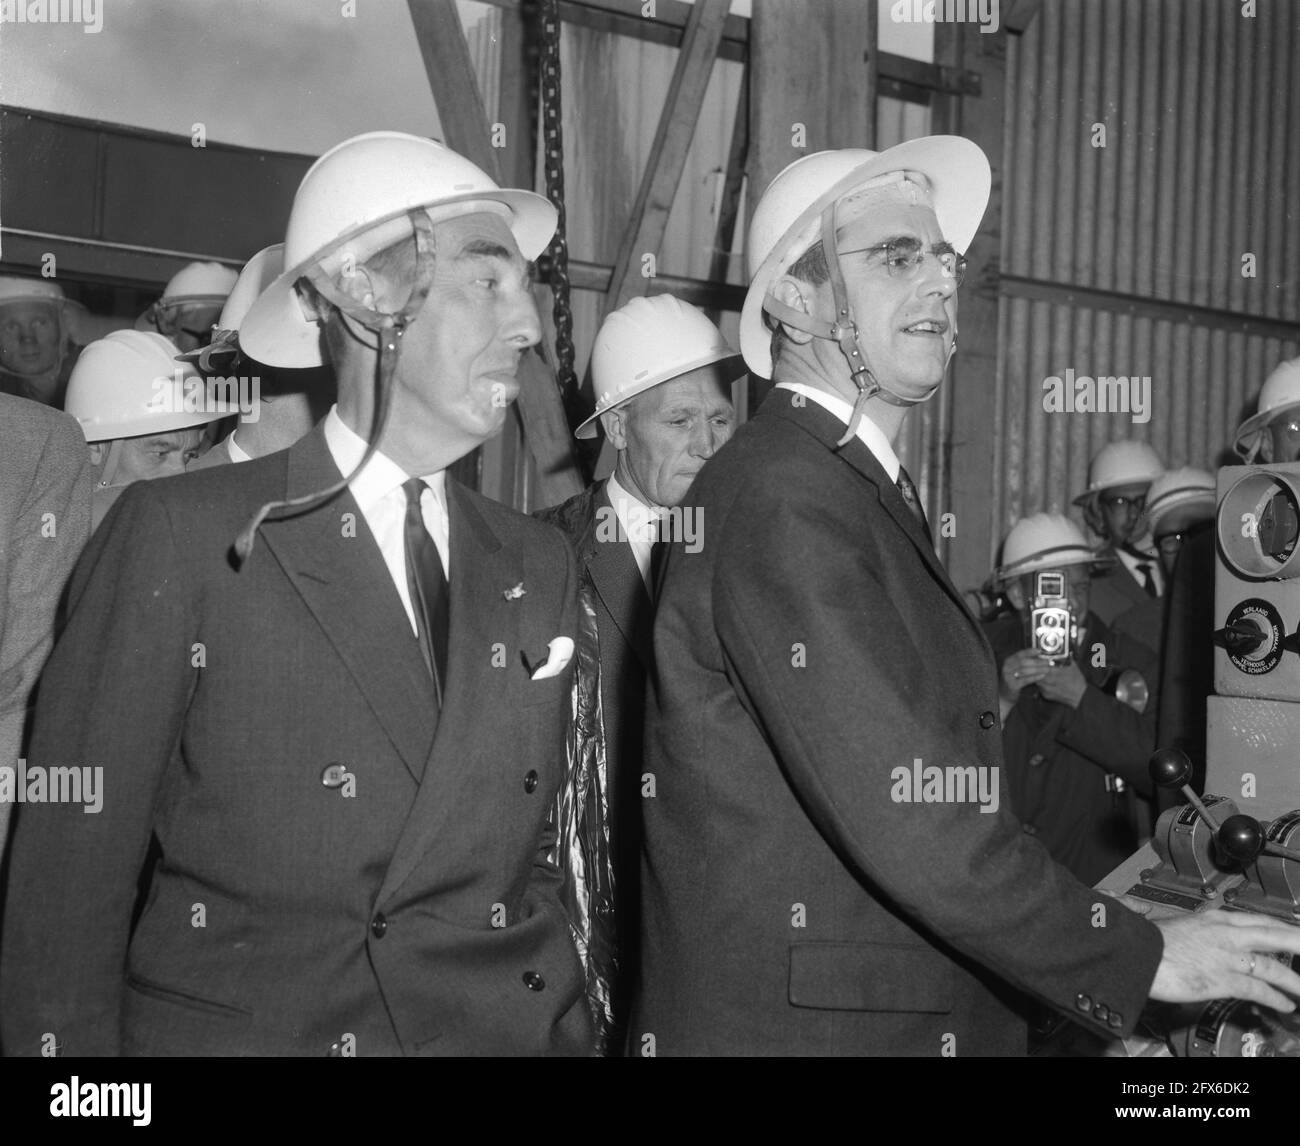 Natural gas field at Slochteren officially put into use Mr. Fock and Dr. de Pous during commissioning of the tower, July 25, 1963, The Netherlands, 20th century press agency photo, news to remember, documentary, historic photography 1945-1990, visual stories, human history of the Twentieth Century, capturing moments in time Stock Photo